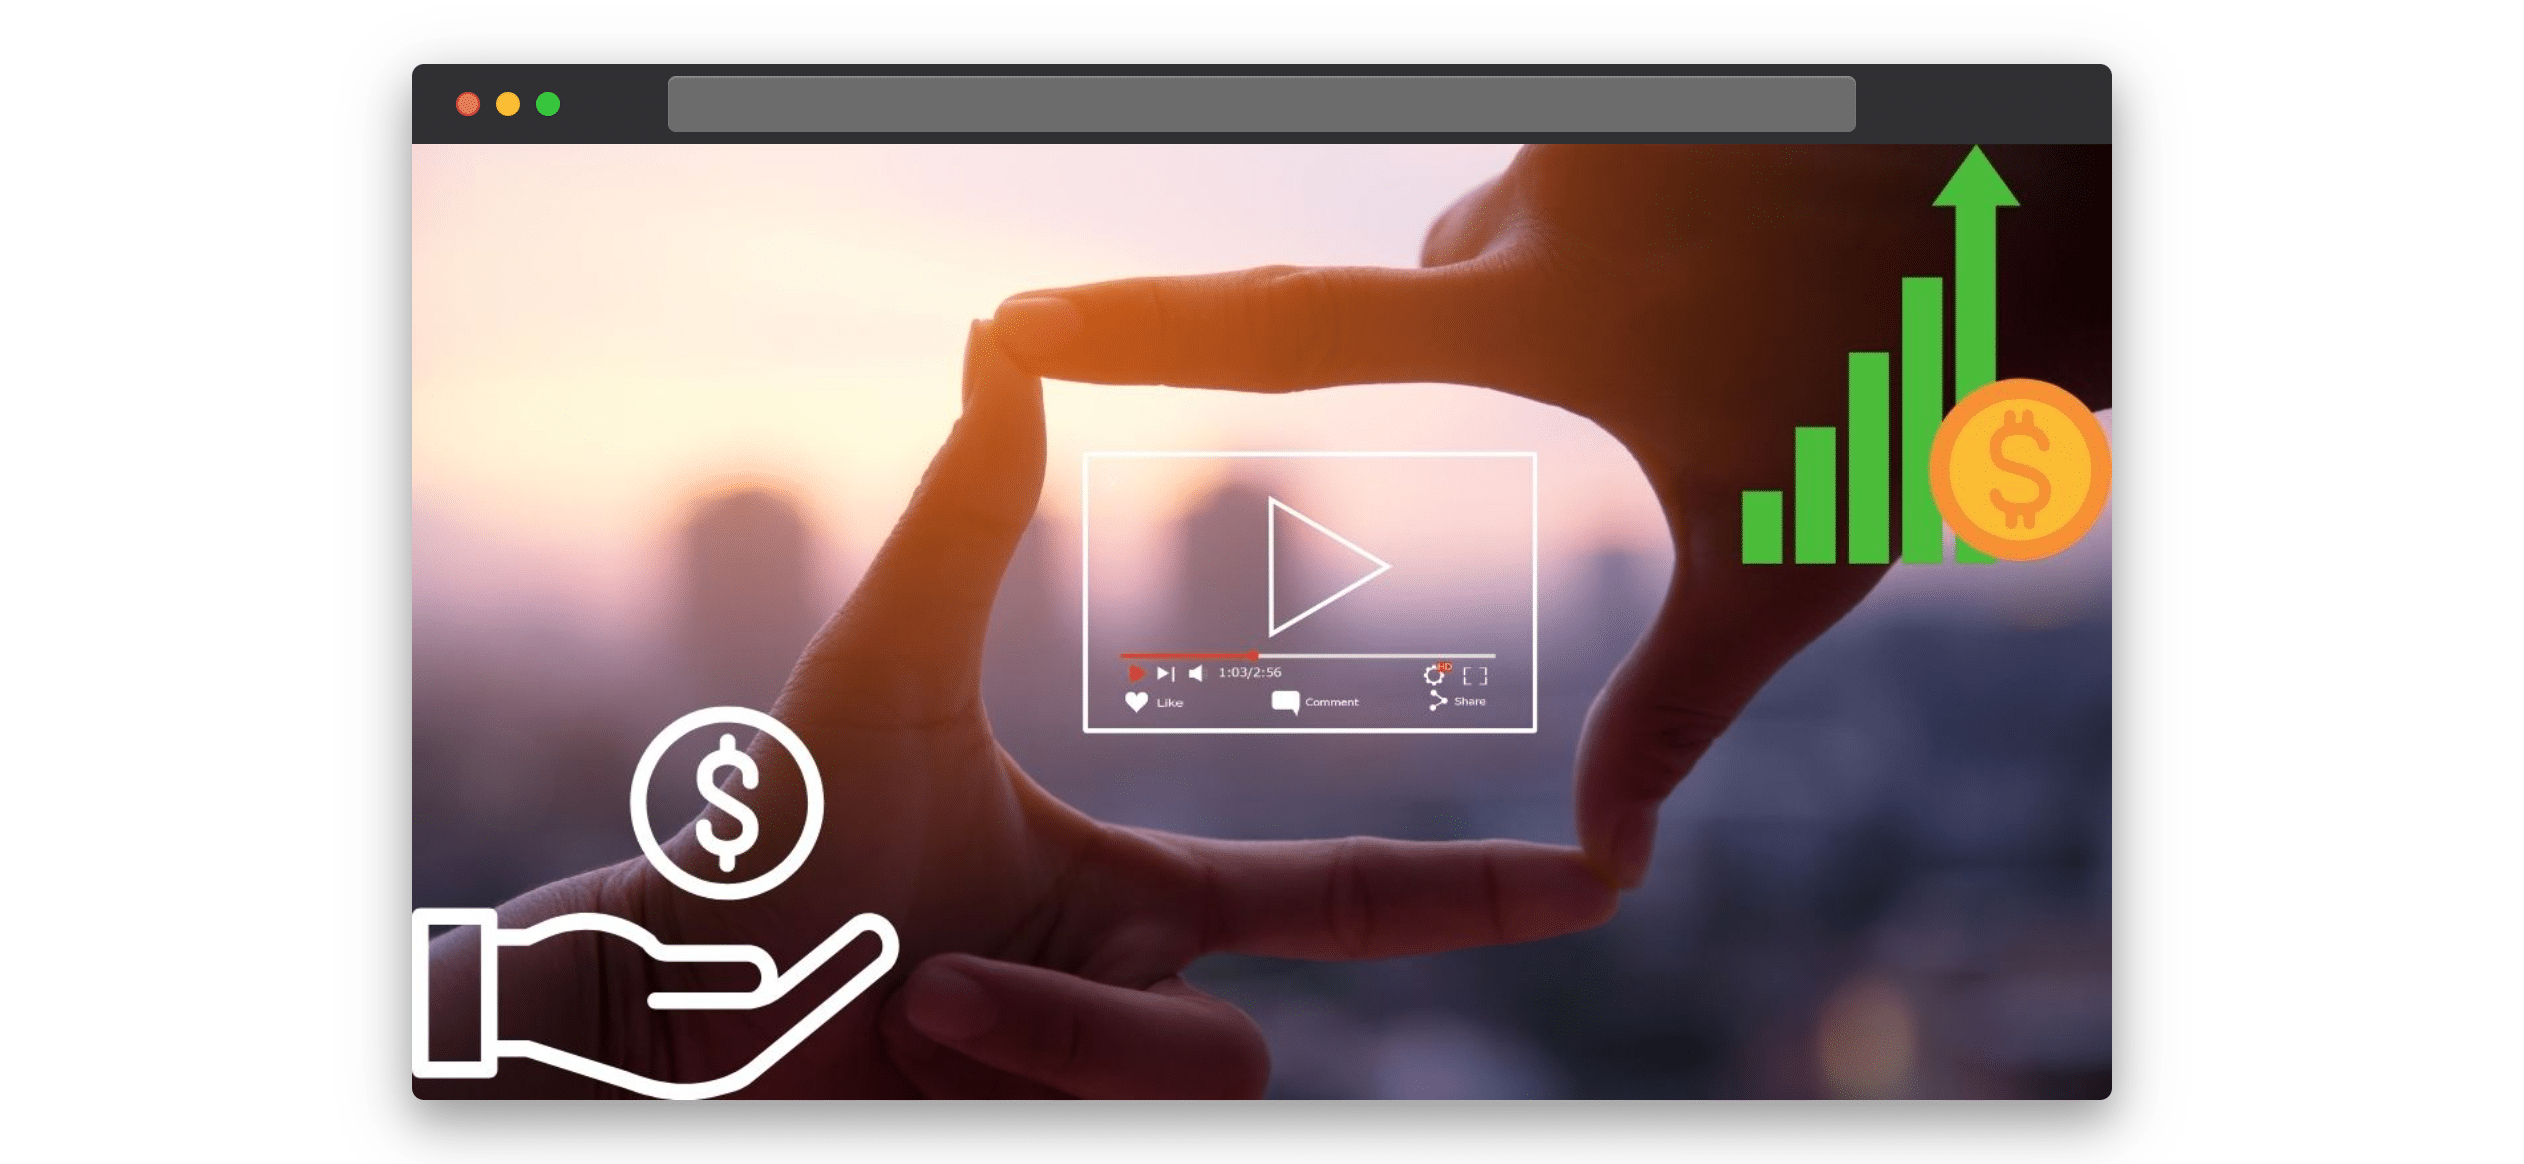 Using video will increase sales 